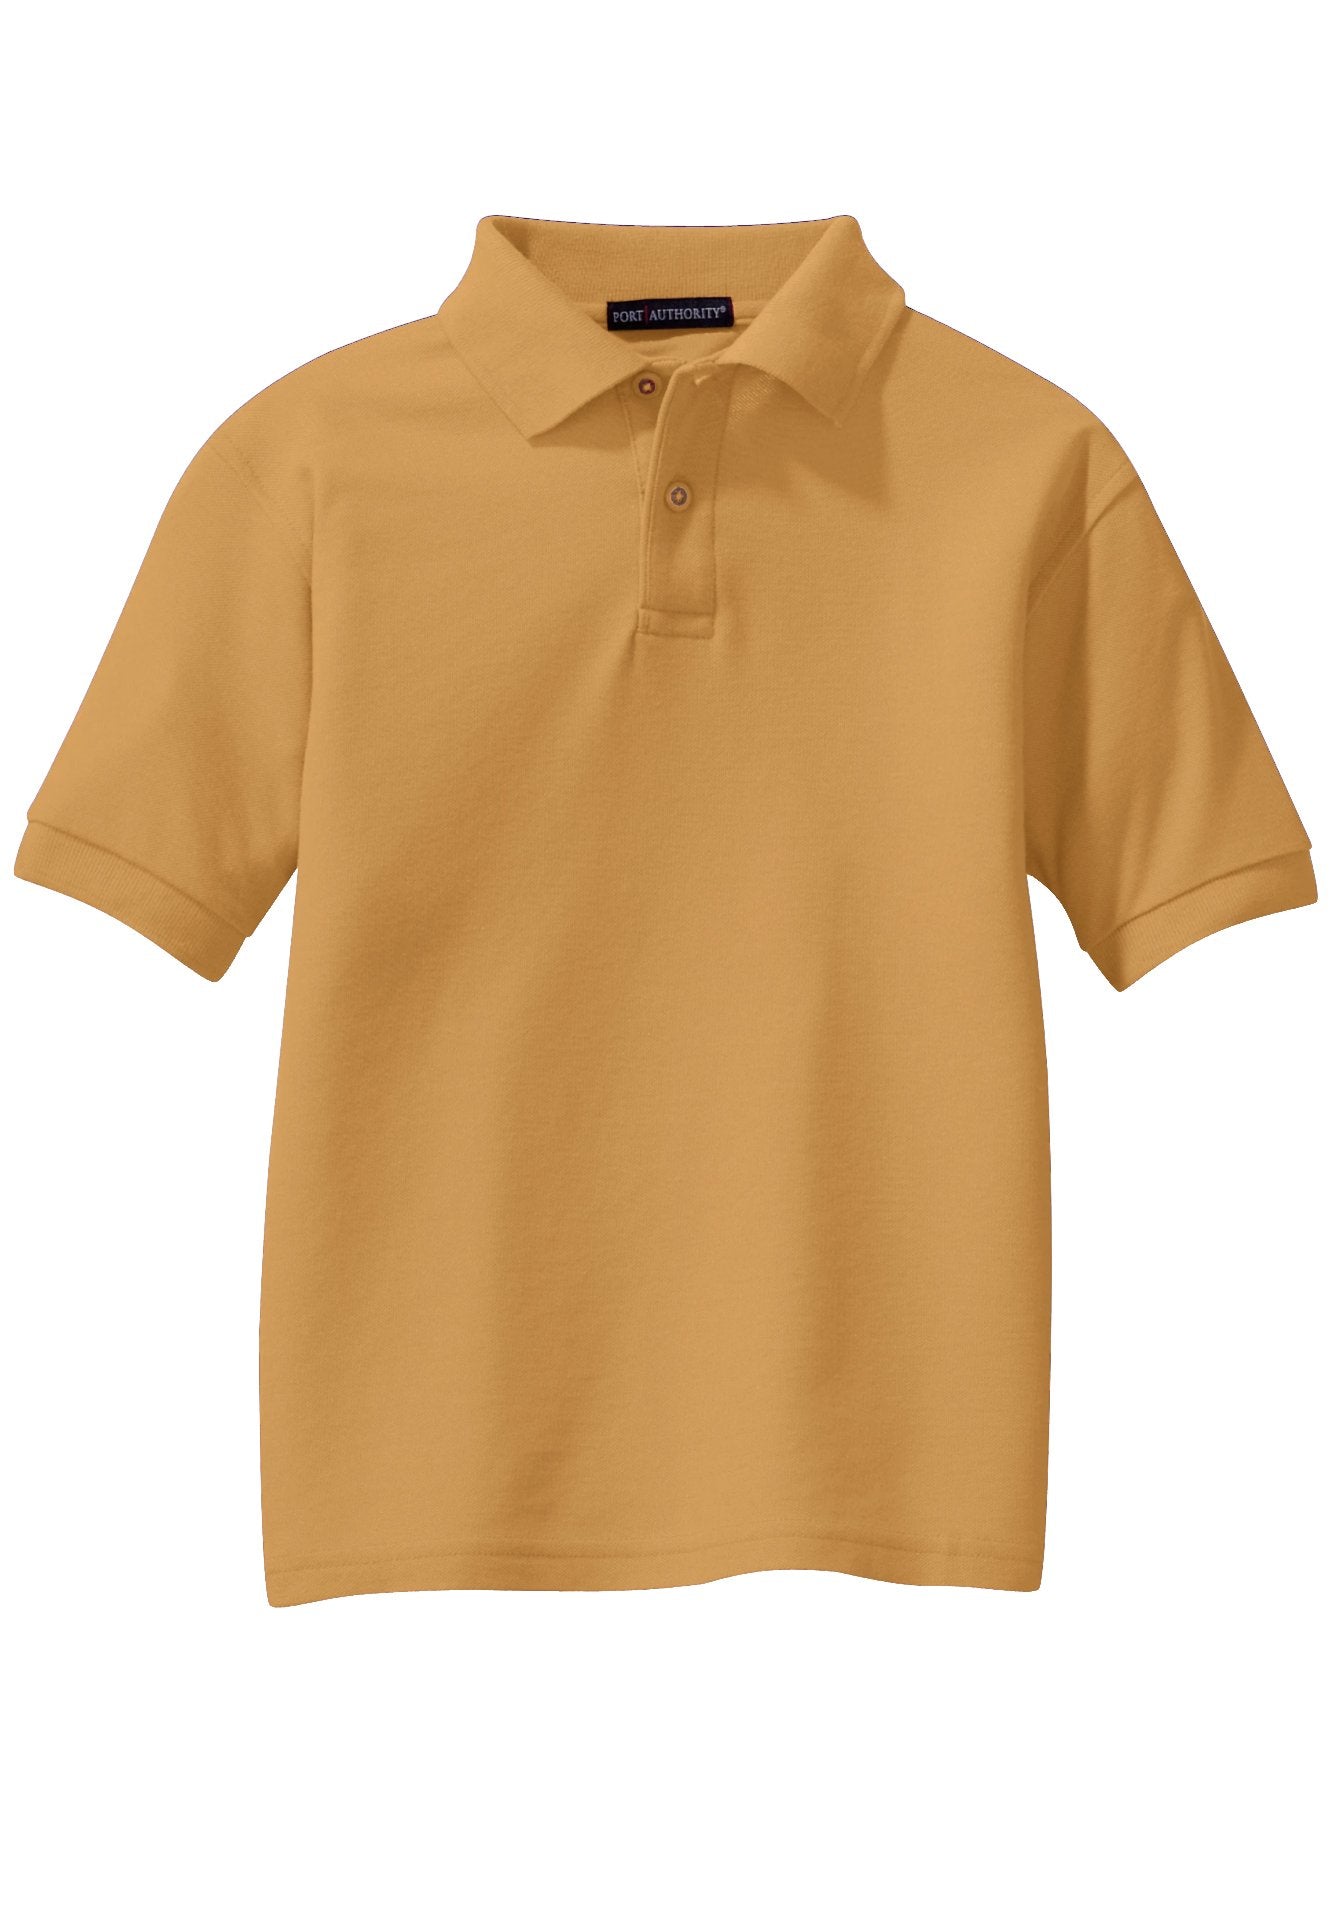 Port Authority® Youth Silk Touch™  Polo - New Colors!